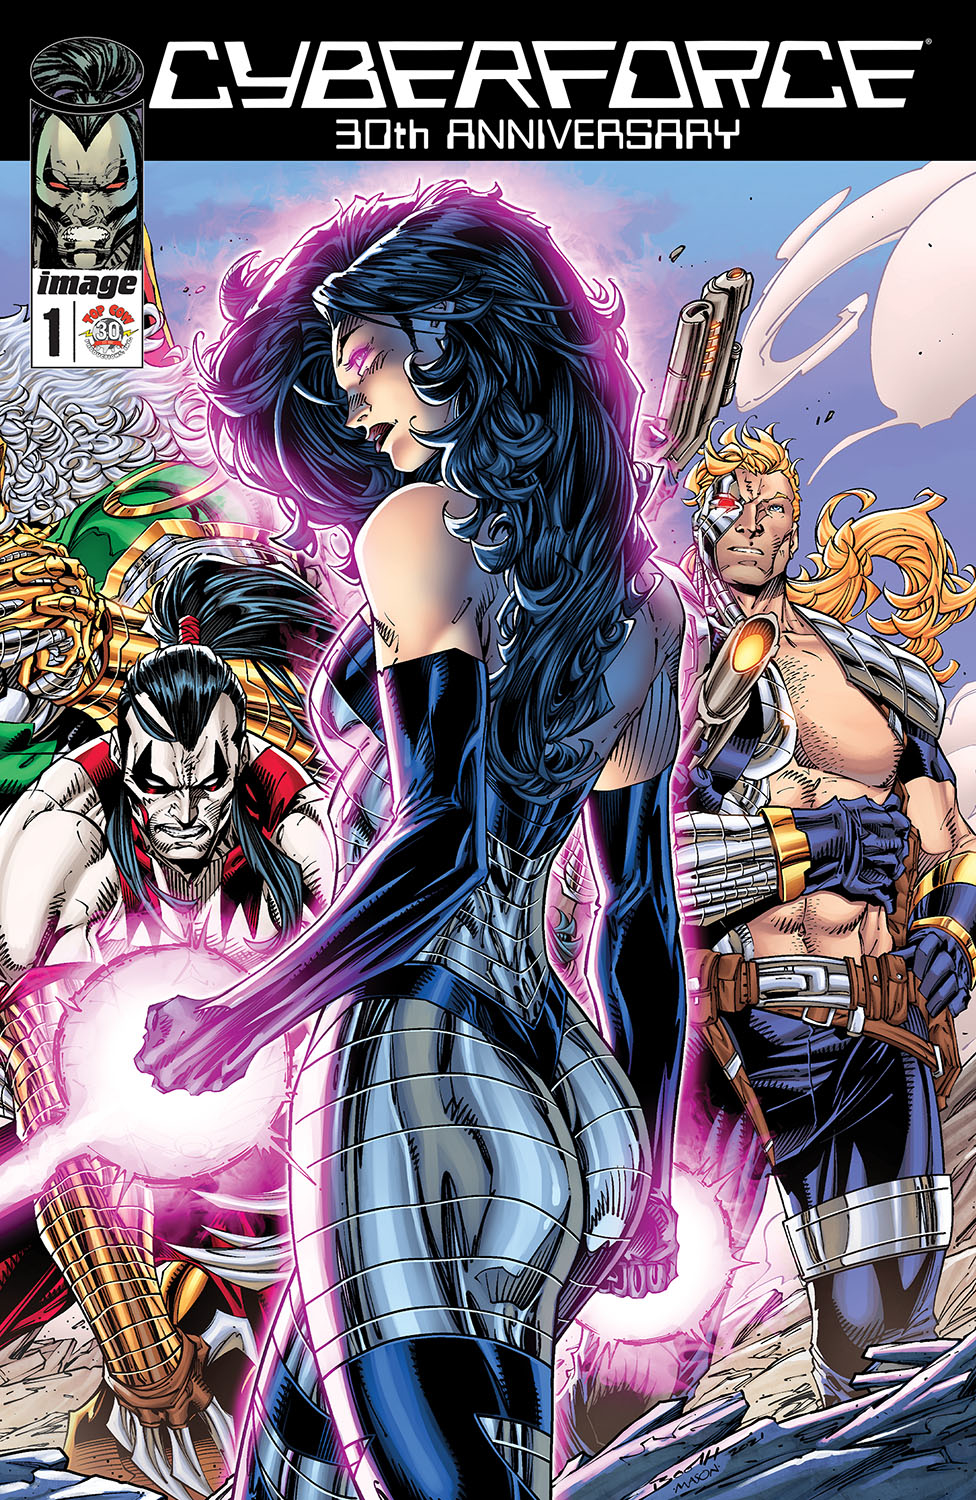 Cyberforce #1 30th Anniversary Edition Cover C Booth (Mature)